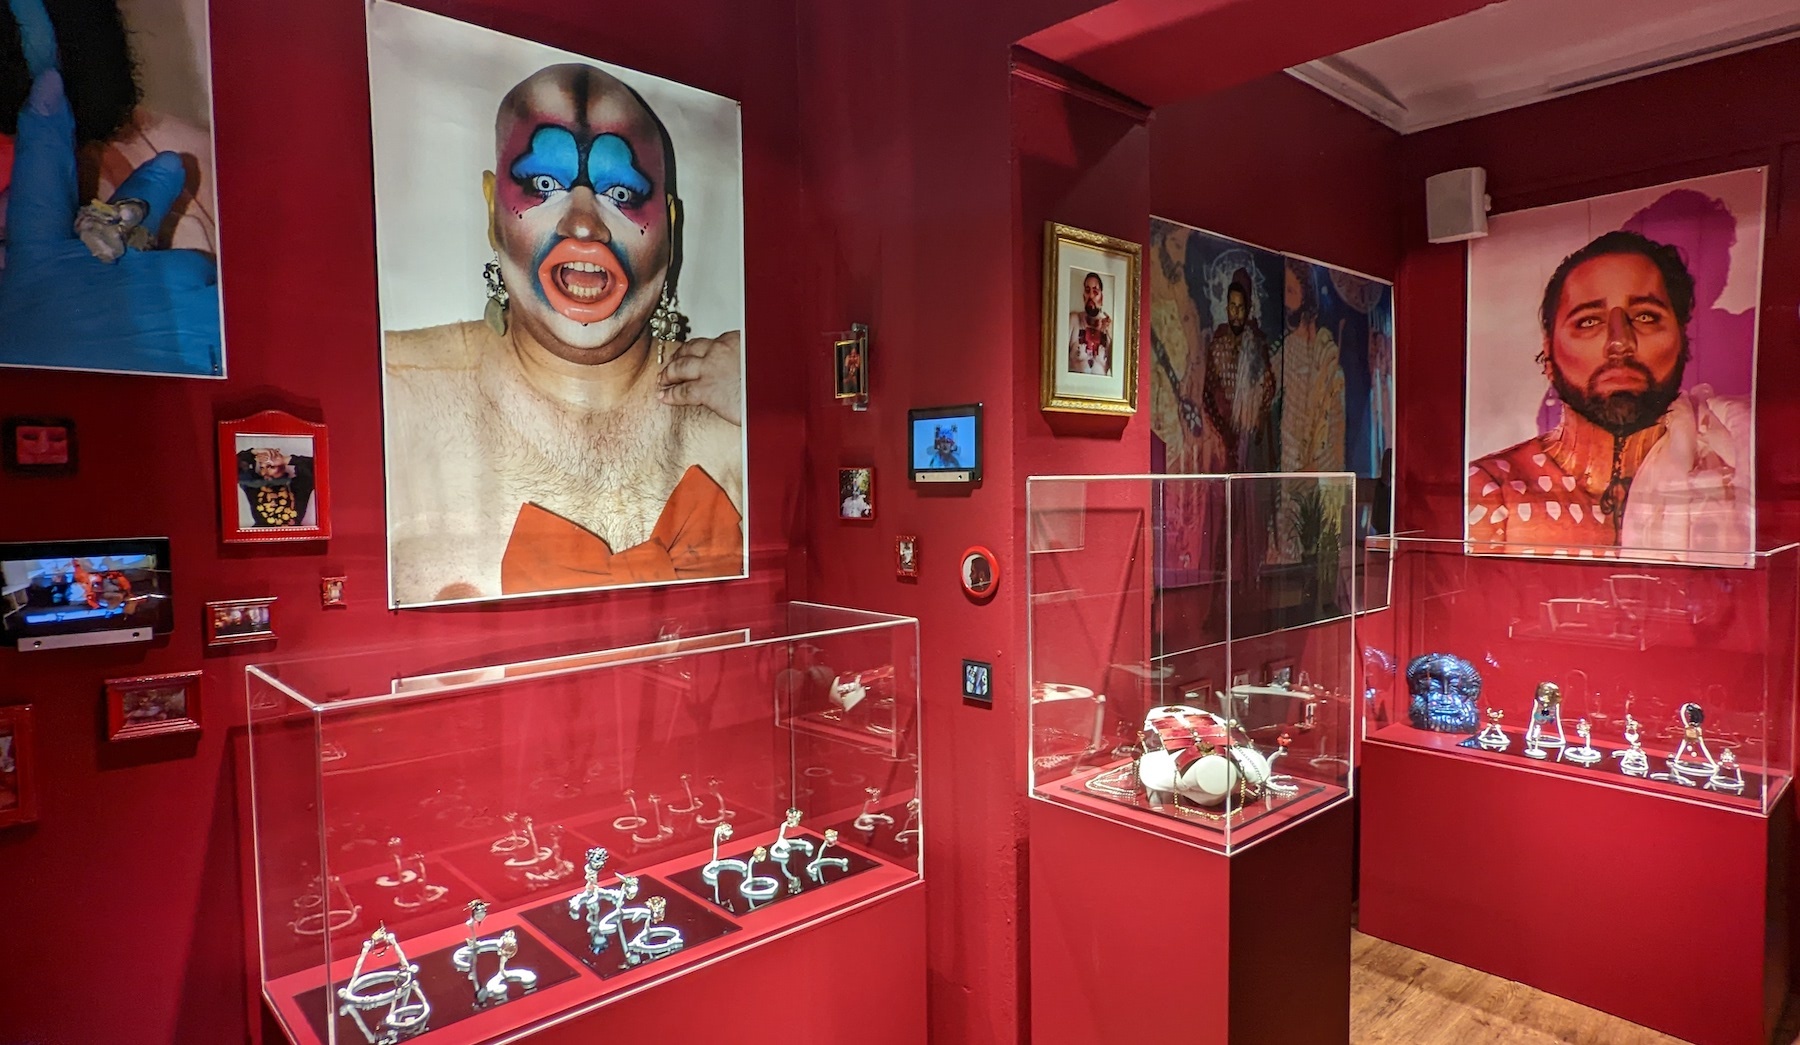 A room with deep red walls is filled with small and large photographs, screens and perspex vitrines holding extravagant jewellery